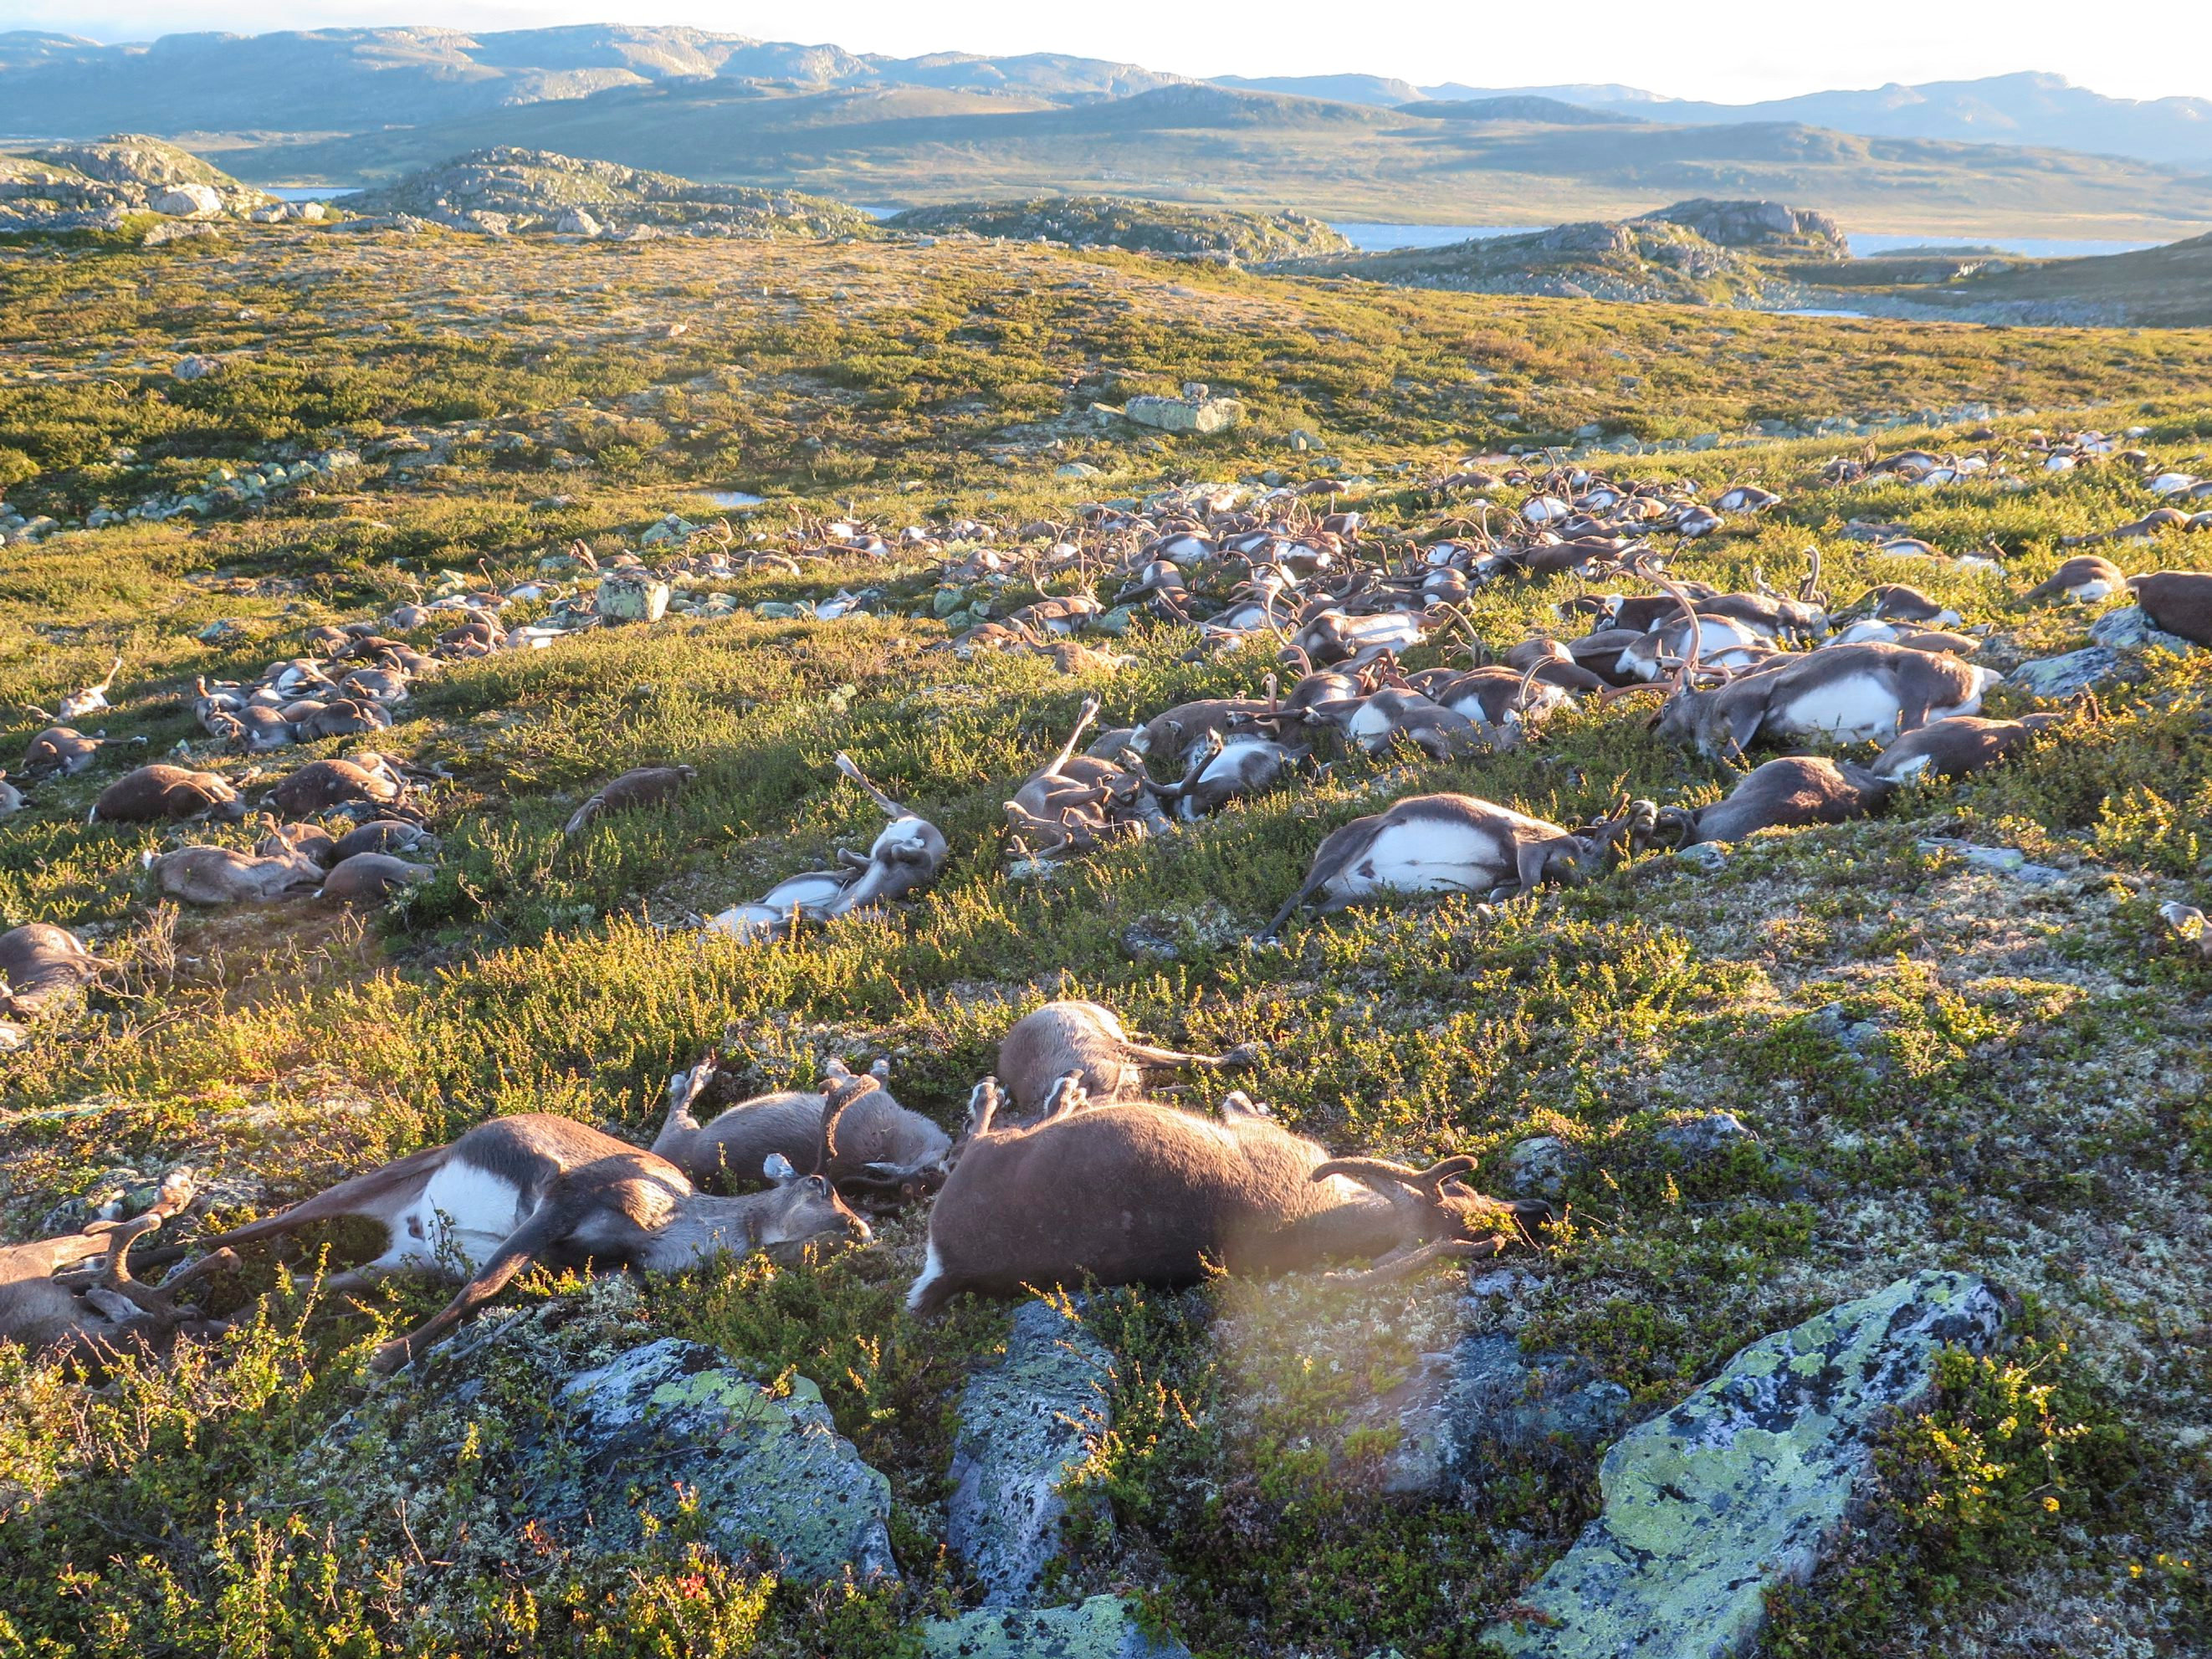 Dead wild reindeer are seen on Hardangervidda in Norway, after lightning struck the central mountain plateau and killed more than 300 of them, in this undated handout photo. Haavard Kjoentvedt/Norwegian Nature Inspectorate/NTB Scanpix via REUTERSn